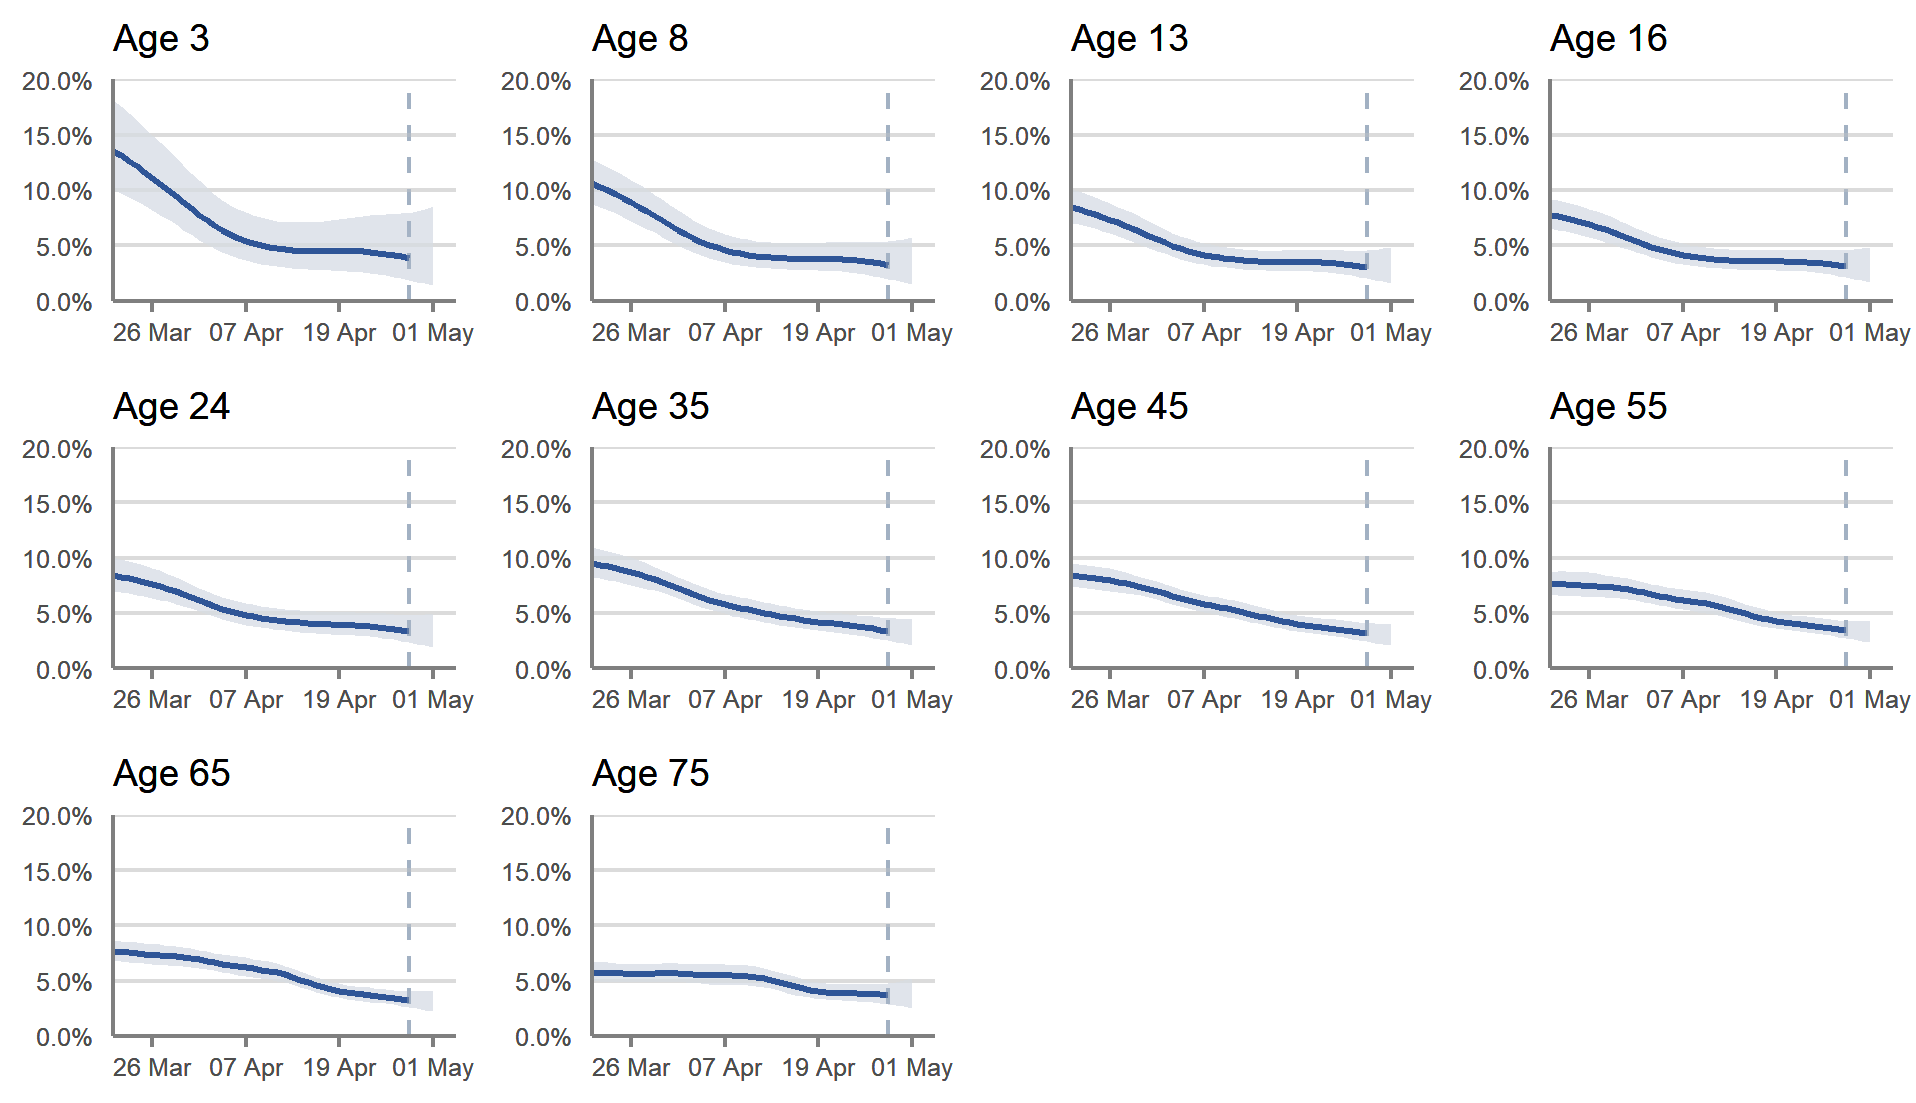 In Scotland, the estimated percentage of people testing positive for COVID-19 has decreased across all ages in recent weeks. However, the trend was uncertain for those aged over 75 years in the most recent week.